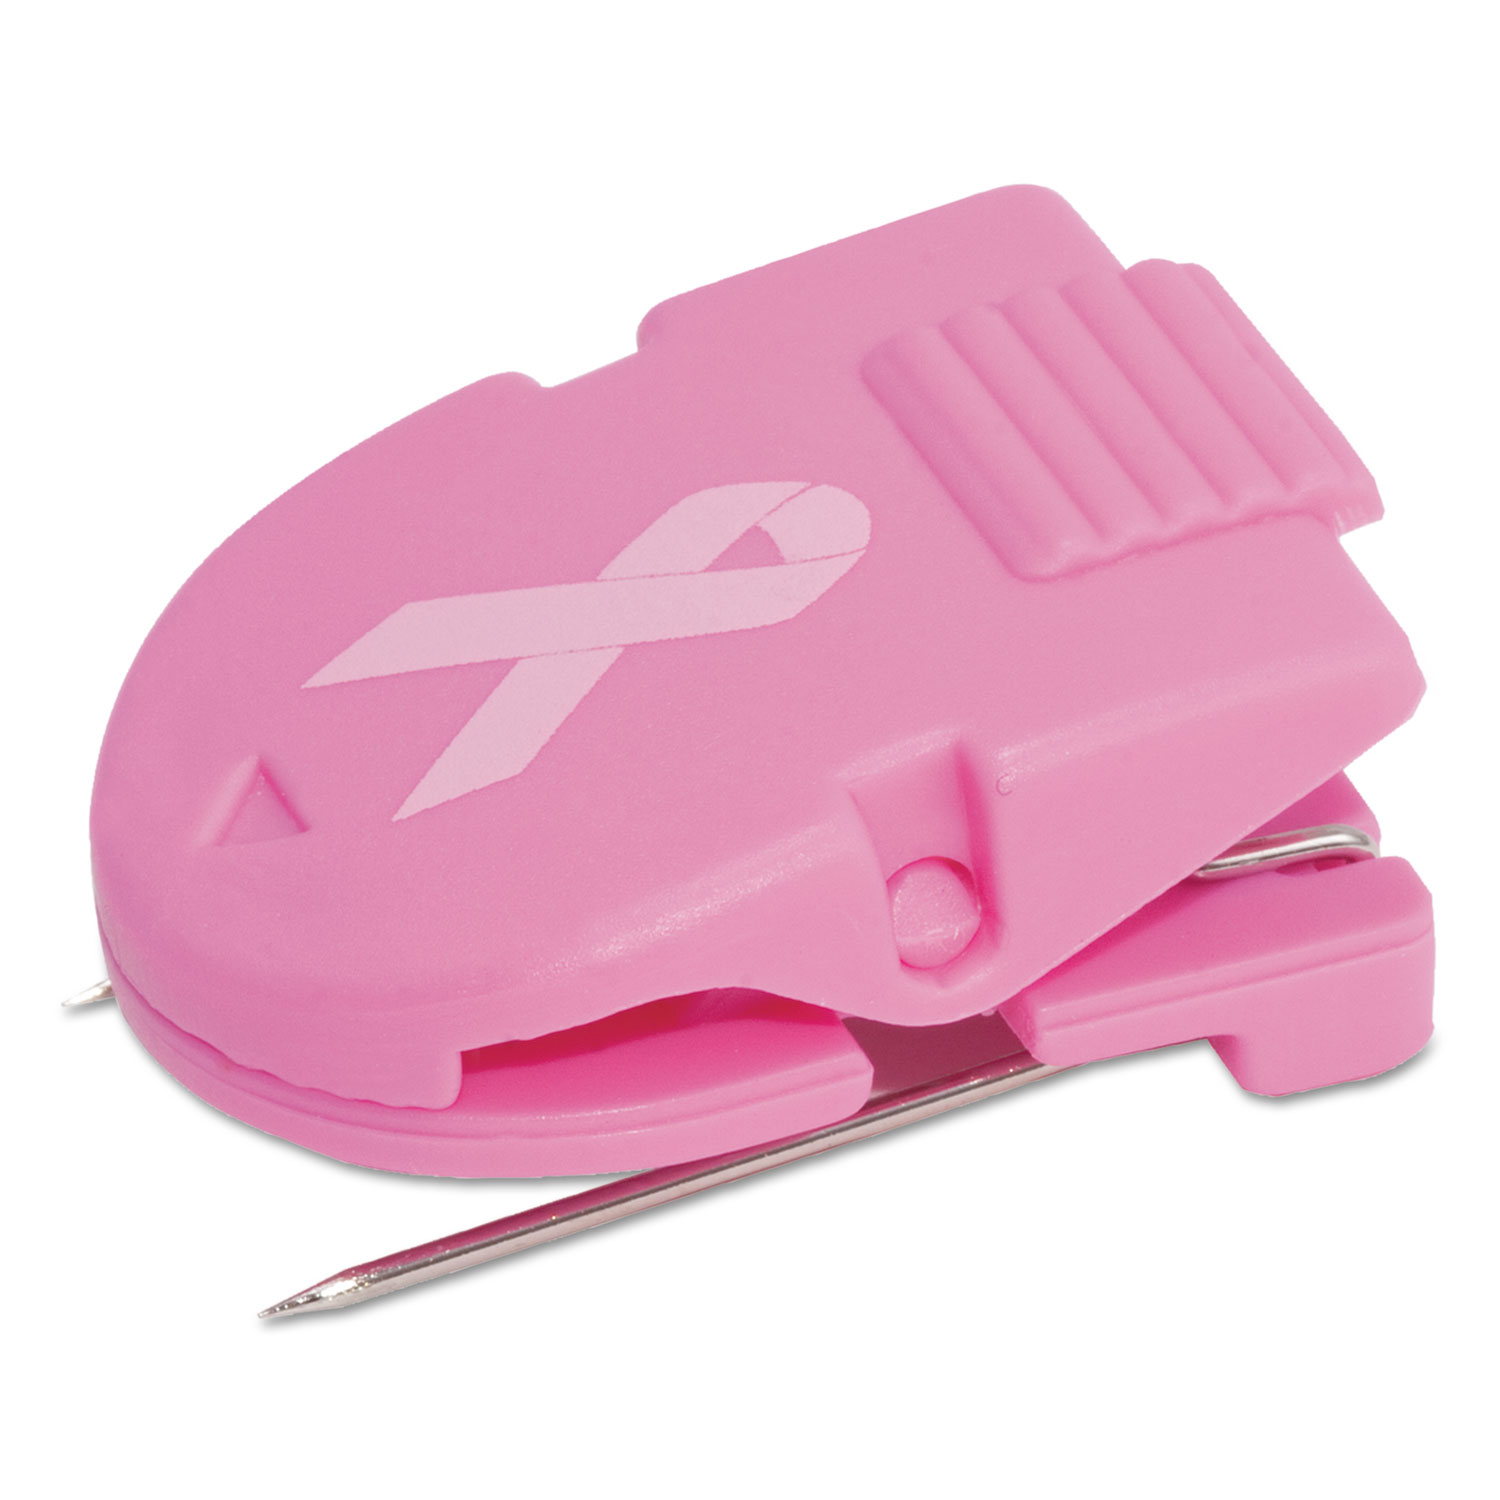 Breast Cancer Awareness Wall Clips for Fabric Panels, Pink, 10/Box